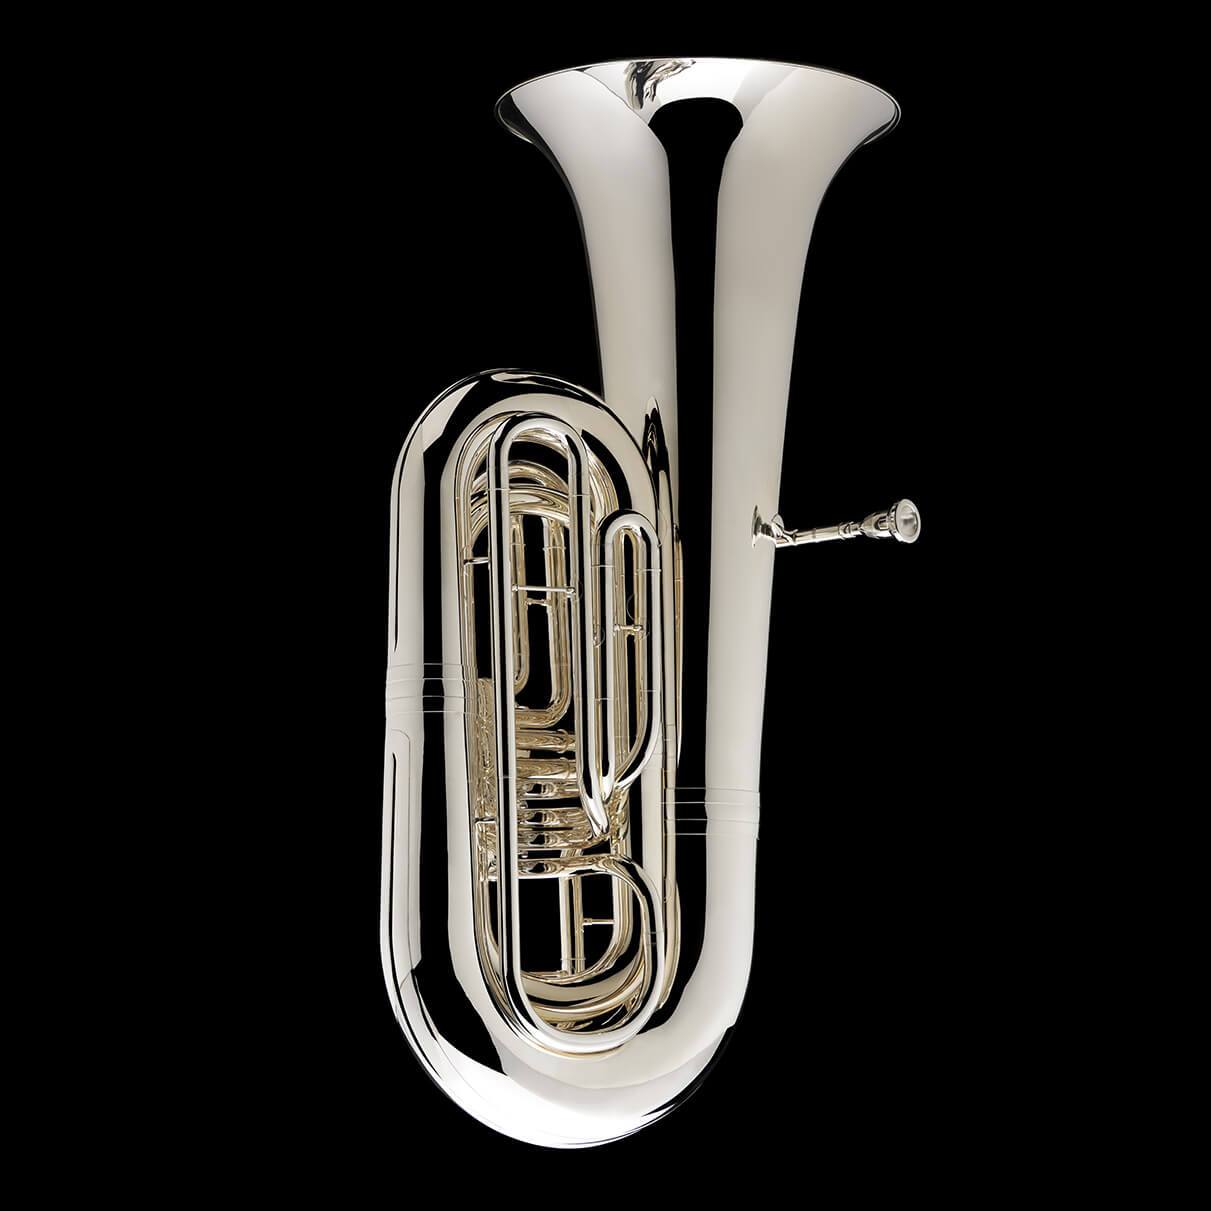 An alternative image of a BBb 6/4 Rotary tuba ‘Kaiser’ from Wessex Tubas